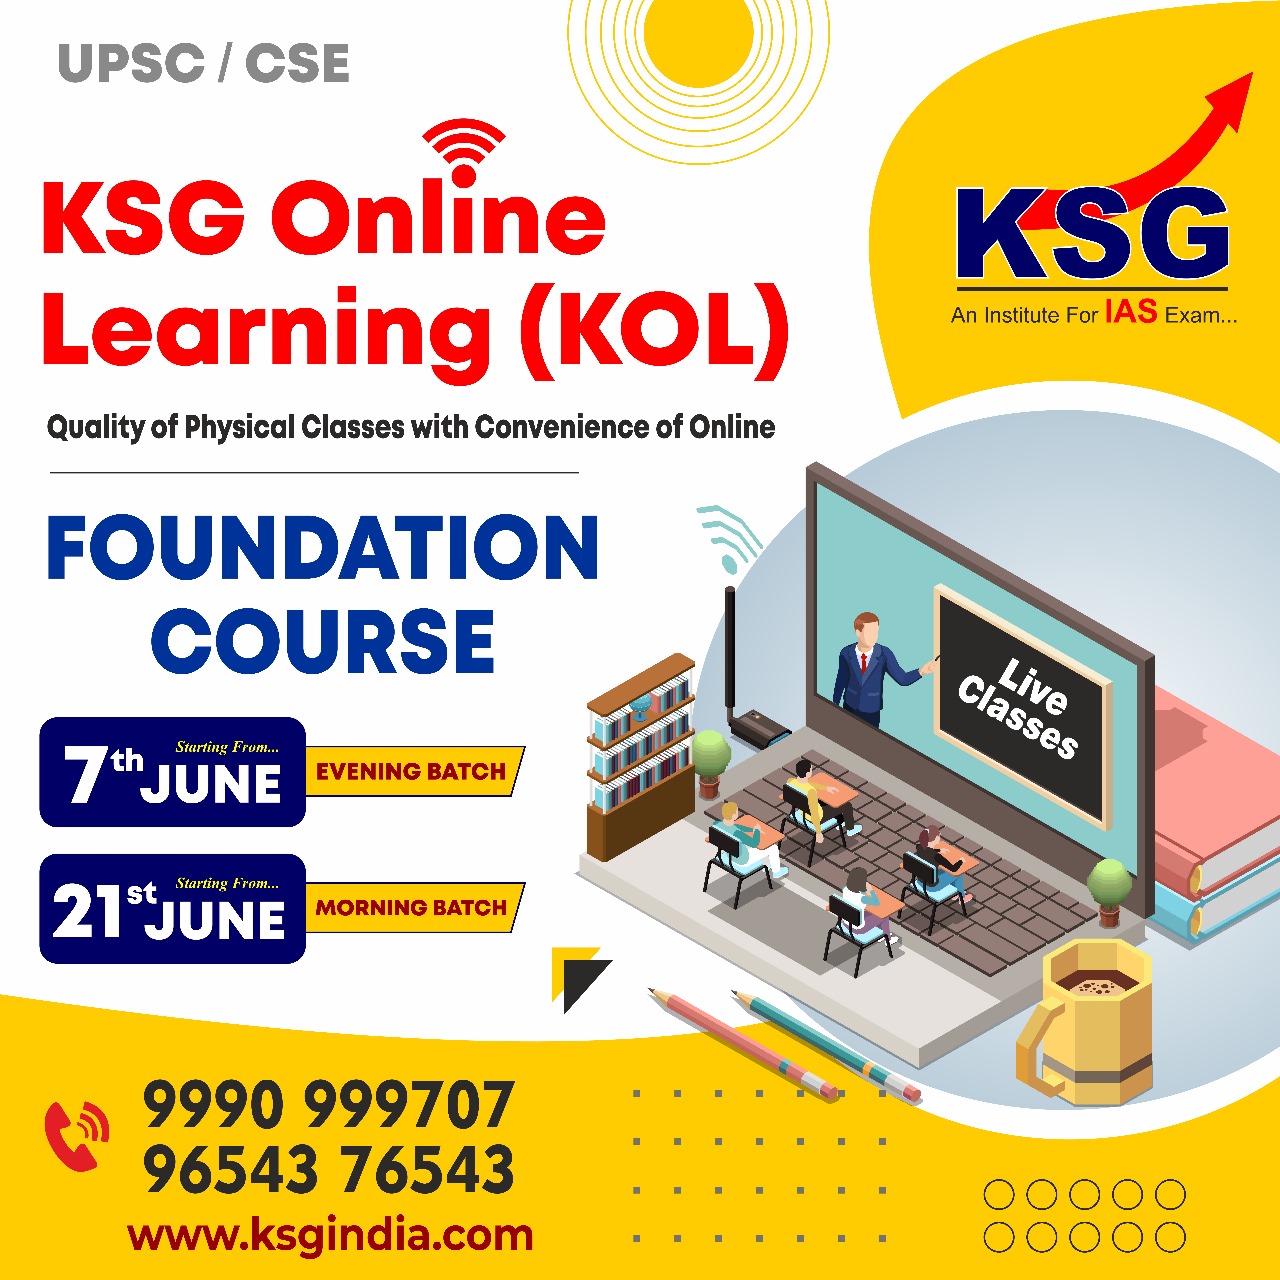 KSG Online Learning: Quality Of Physical Classes With The Convenience Of E- Learning